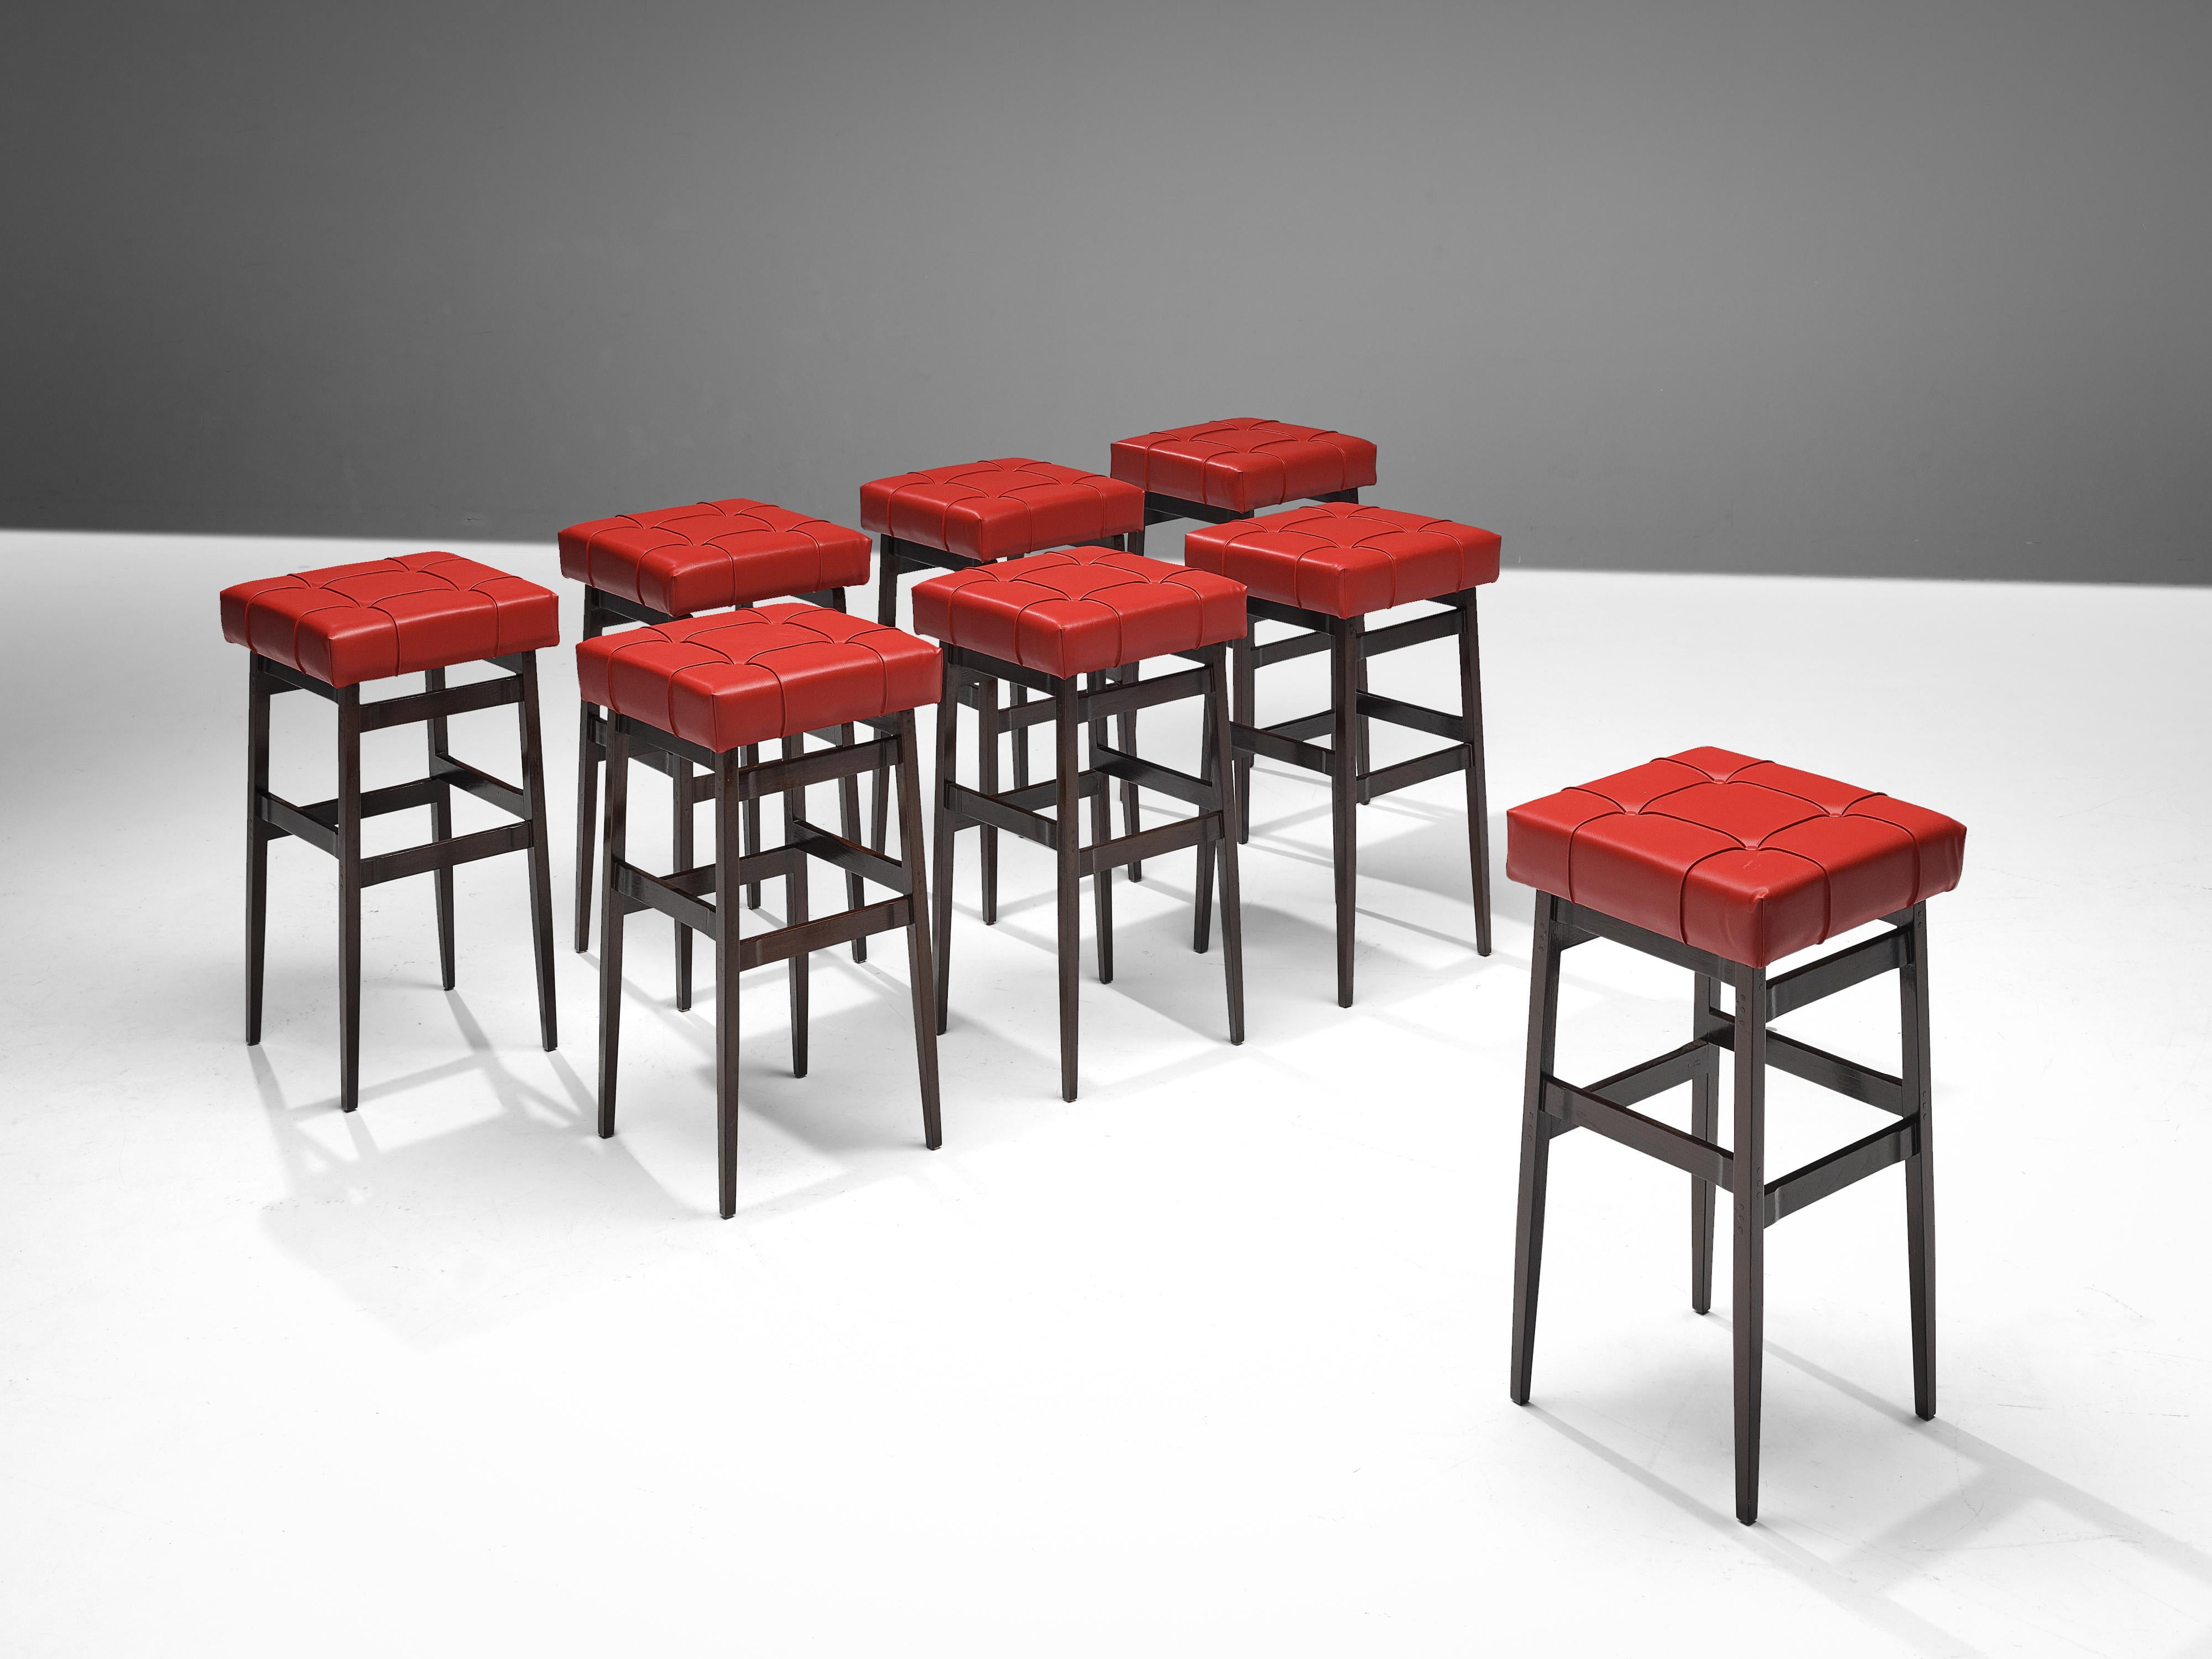 Gianfranco Frattini for Cassina, bar stools designed for the Hotel Parco dei Principi, stained walnut, faux leather, Italy, Rome, circa 1964

This astonishing set of bespoke bar stools is designed by Gianfranco Frattini for Hotel Parco dei Principi